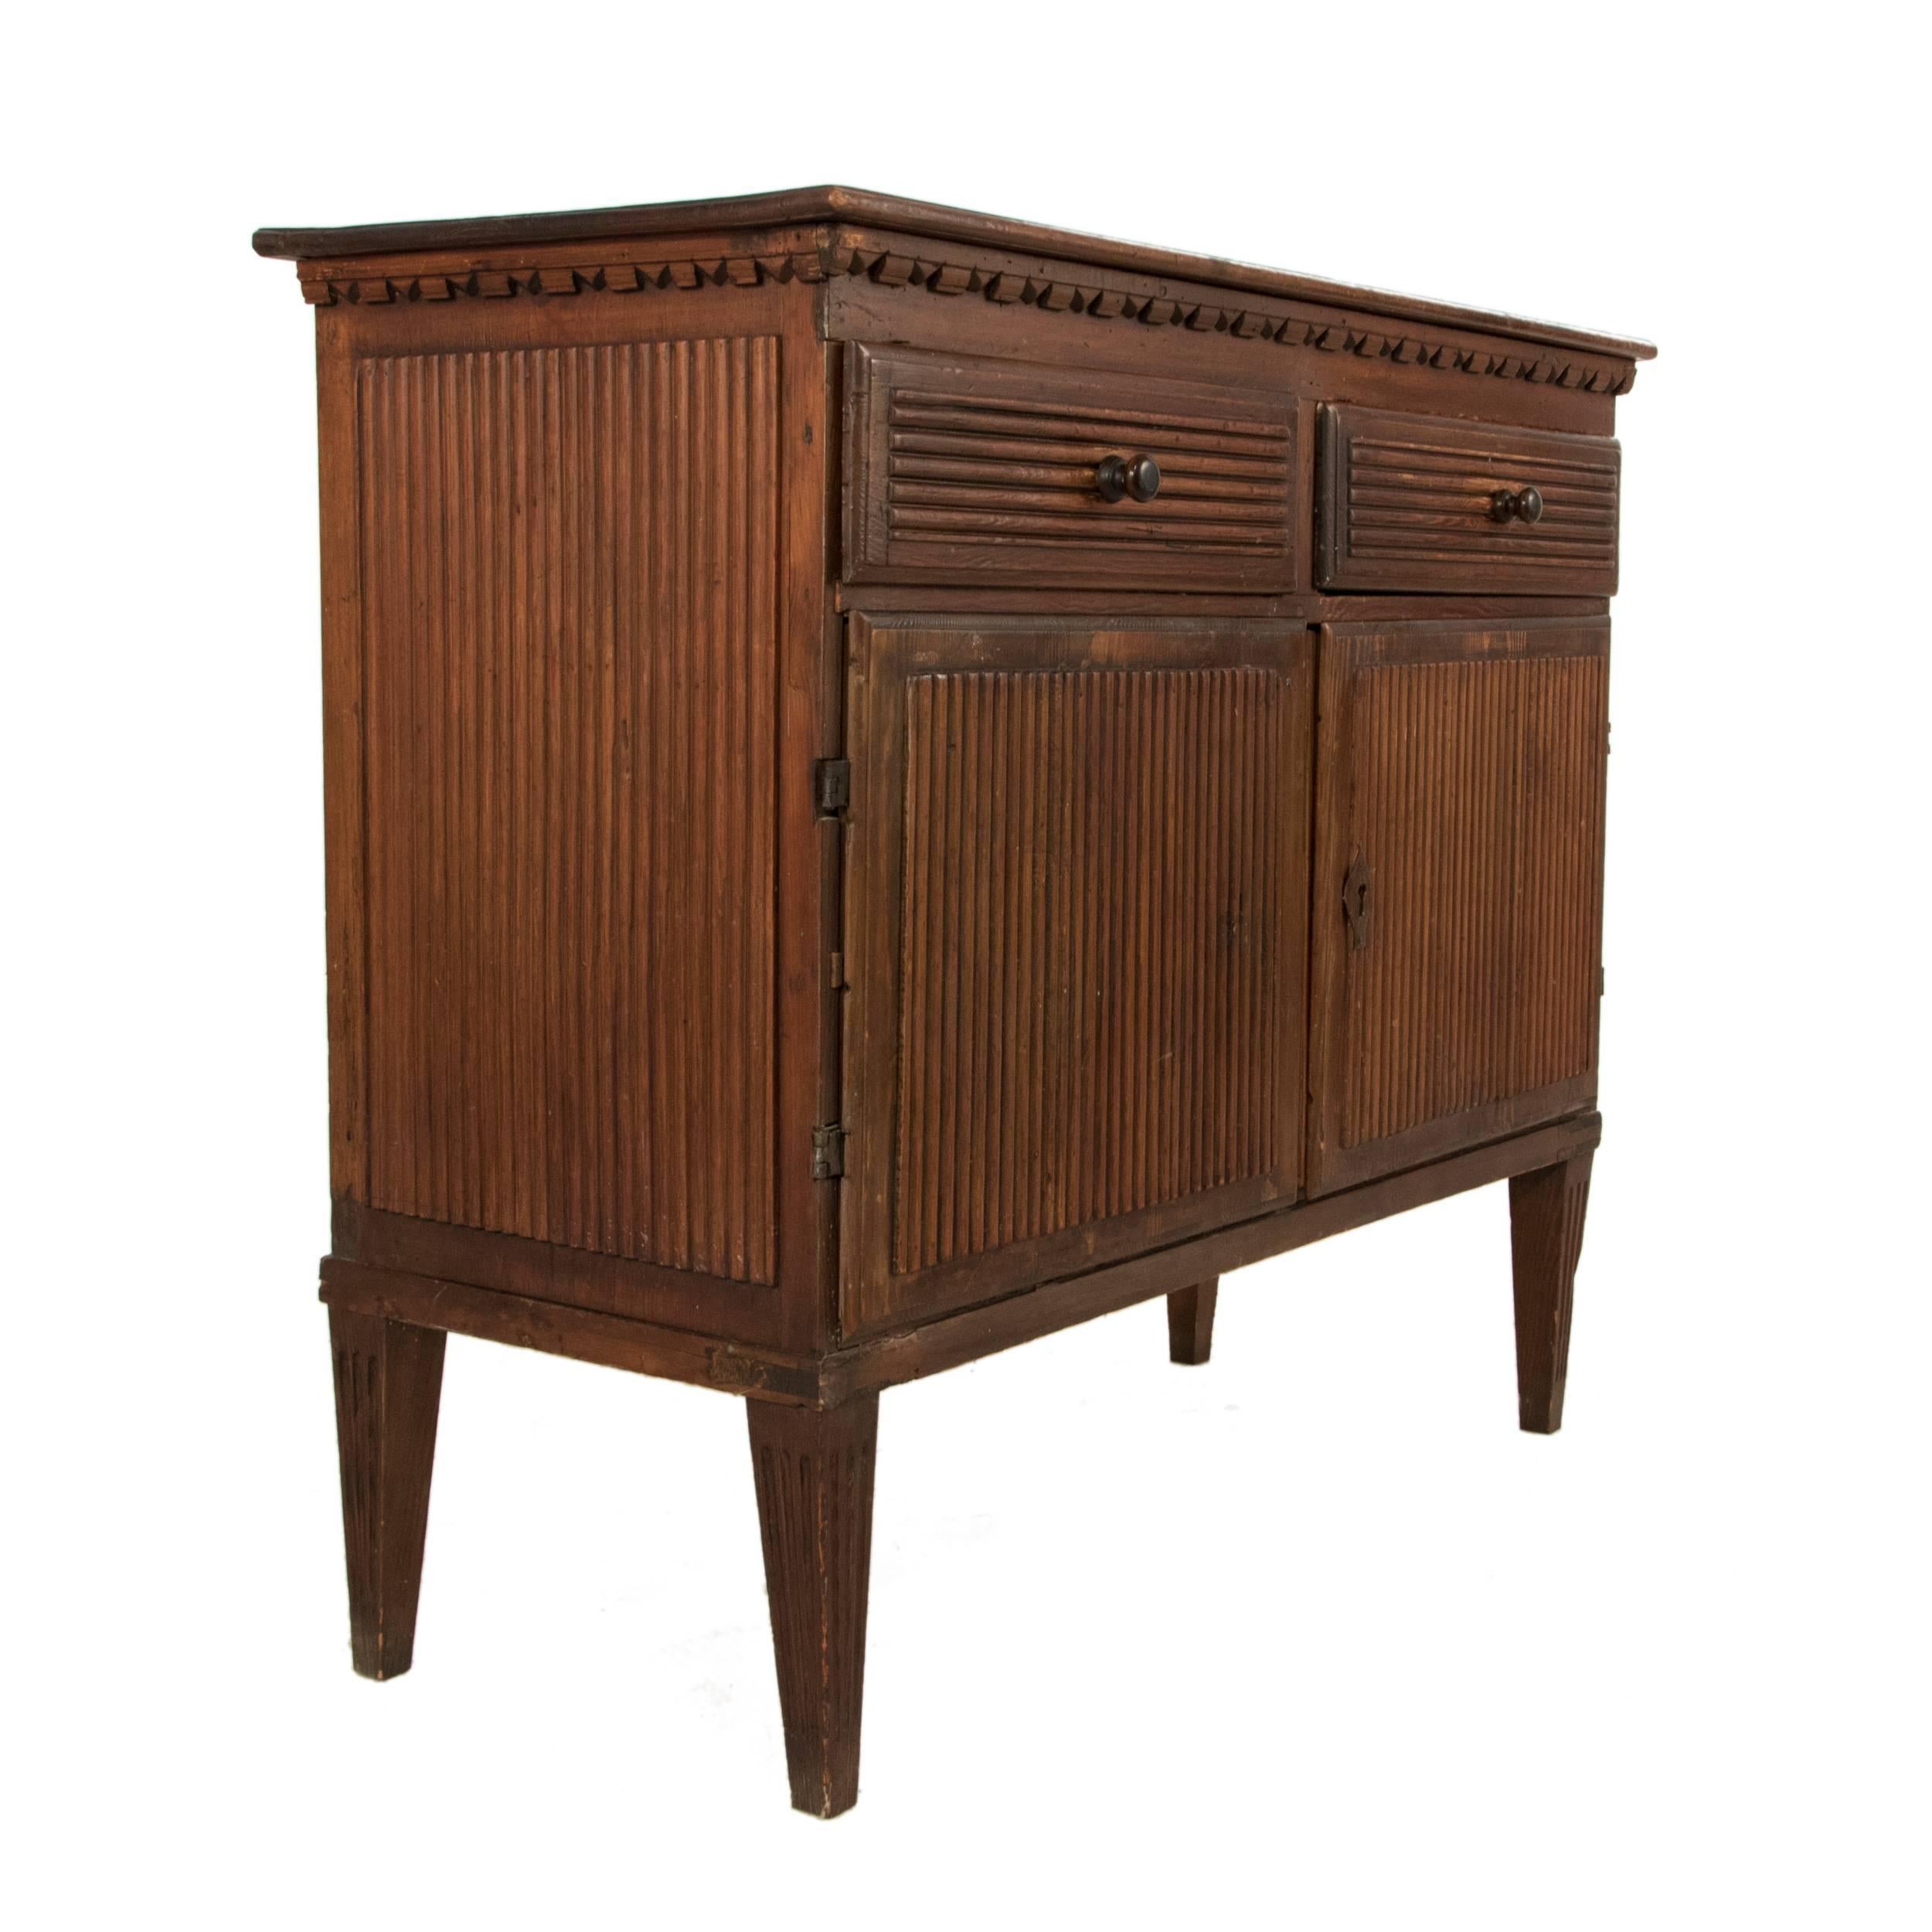 Gustation sideboard with two drawers and doors.